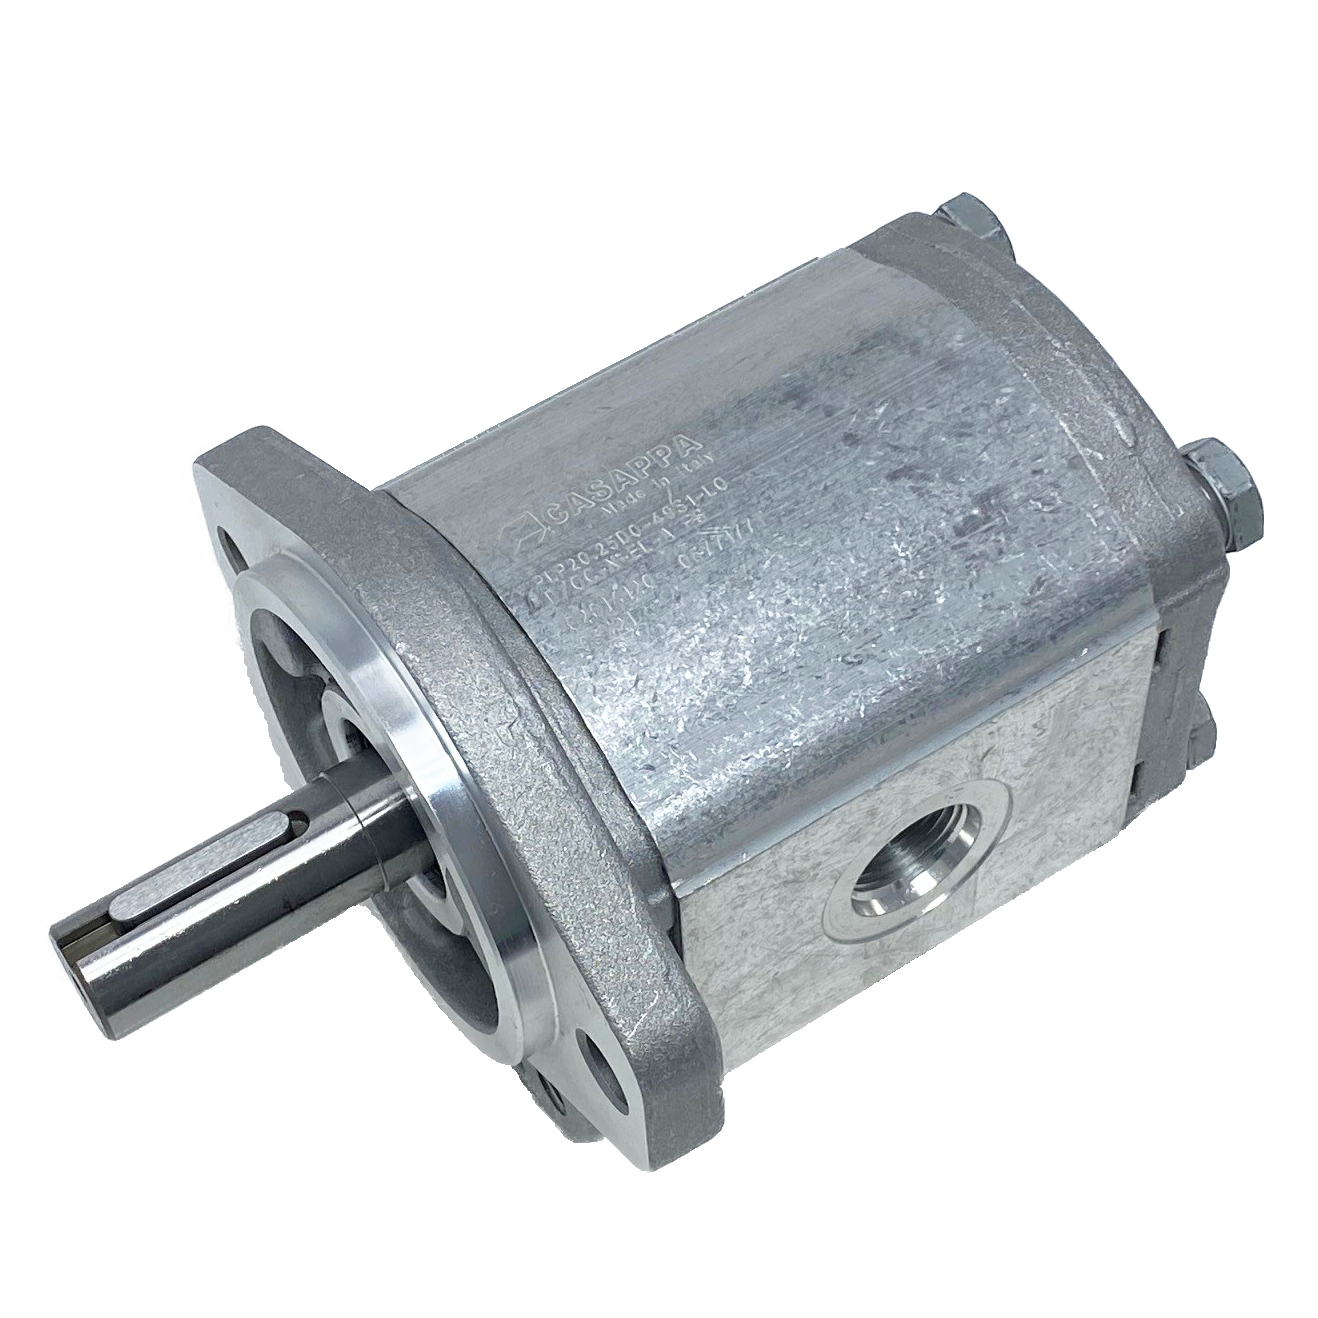 PHM20.25B0-49S9-LOC/OG-N-EL : Casappa Polaris Gear Motor, 26.42cc, 3335psi Rated, 3000RPM, Reversible Interior Drain, 3/4" Bore x 3/16" Key Shaft, SAE A 2-Bolt Flange, 0.625 (5/8") #10 SAE Inlet, 1.25" #20 SAE Outlet, Cast Iron Body, Aluminum Flange